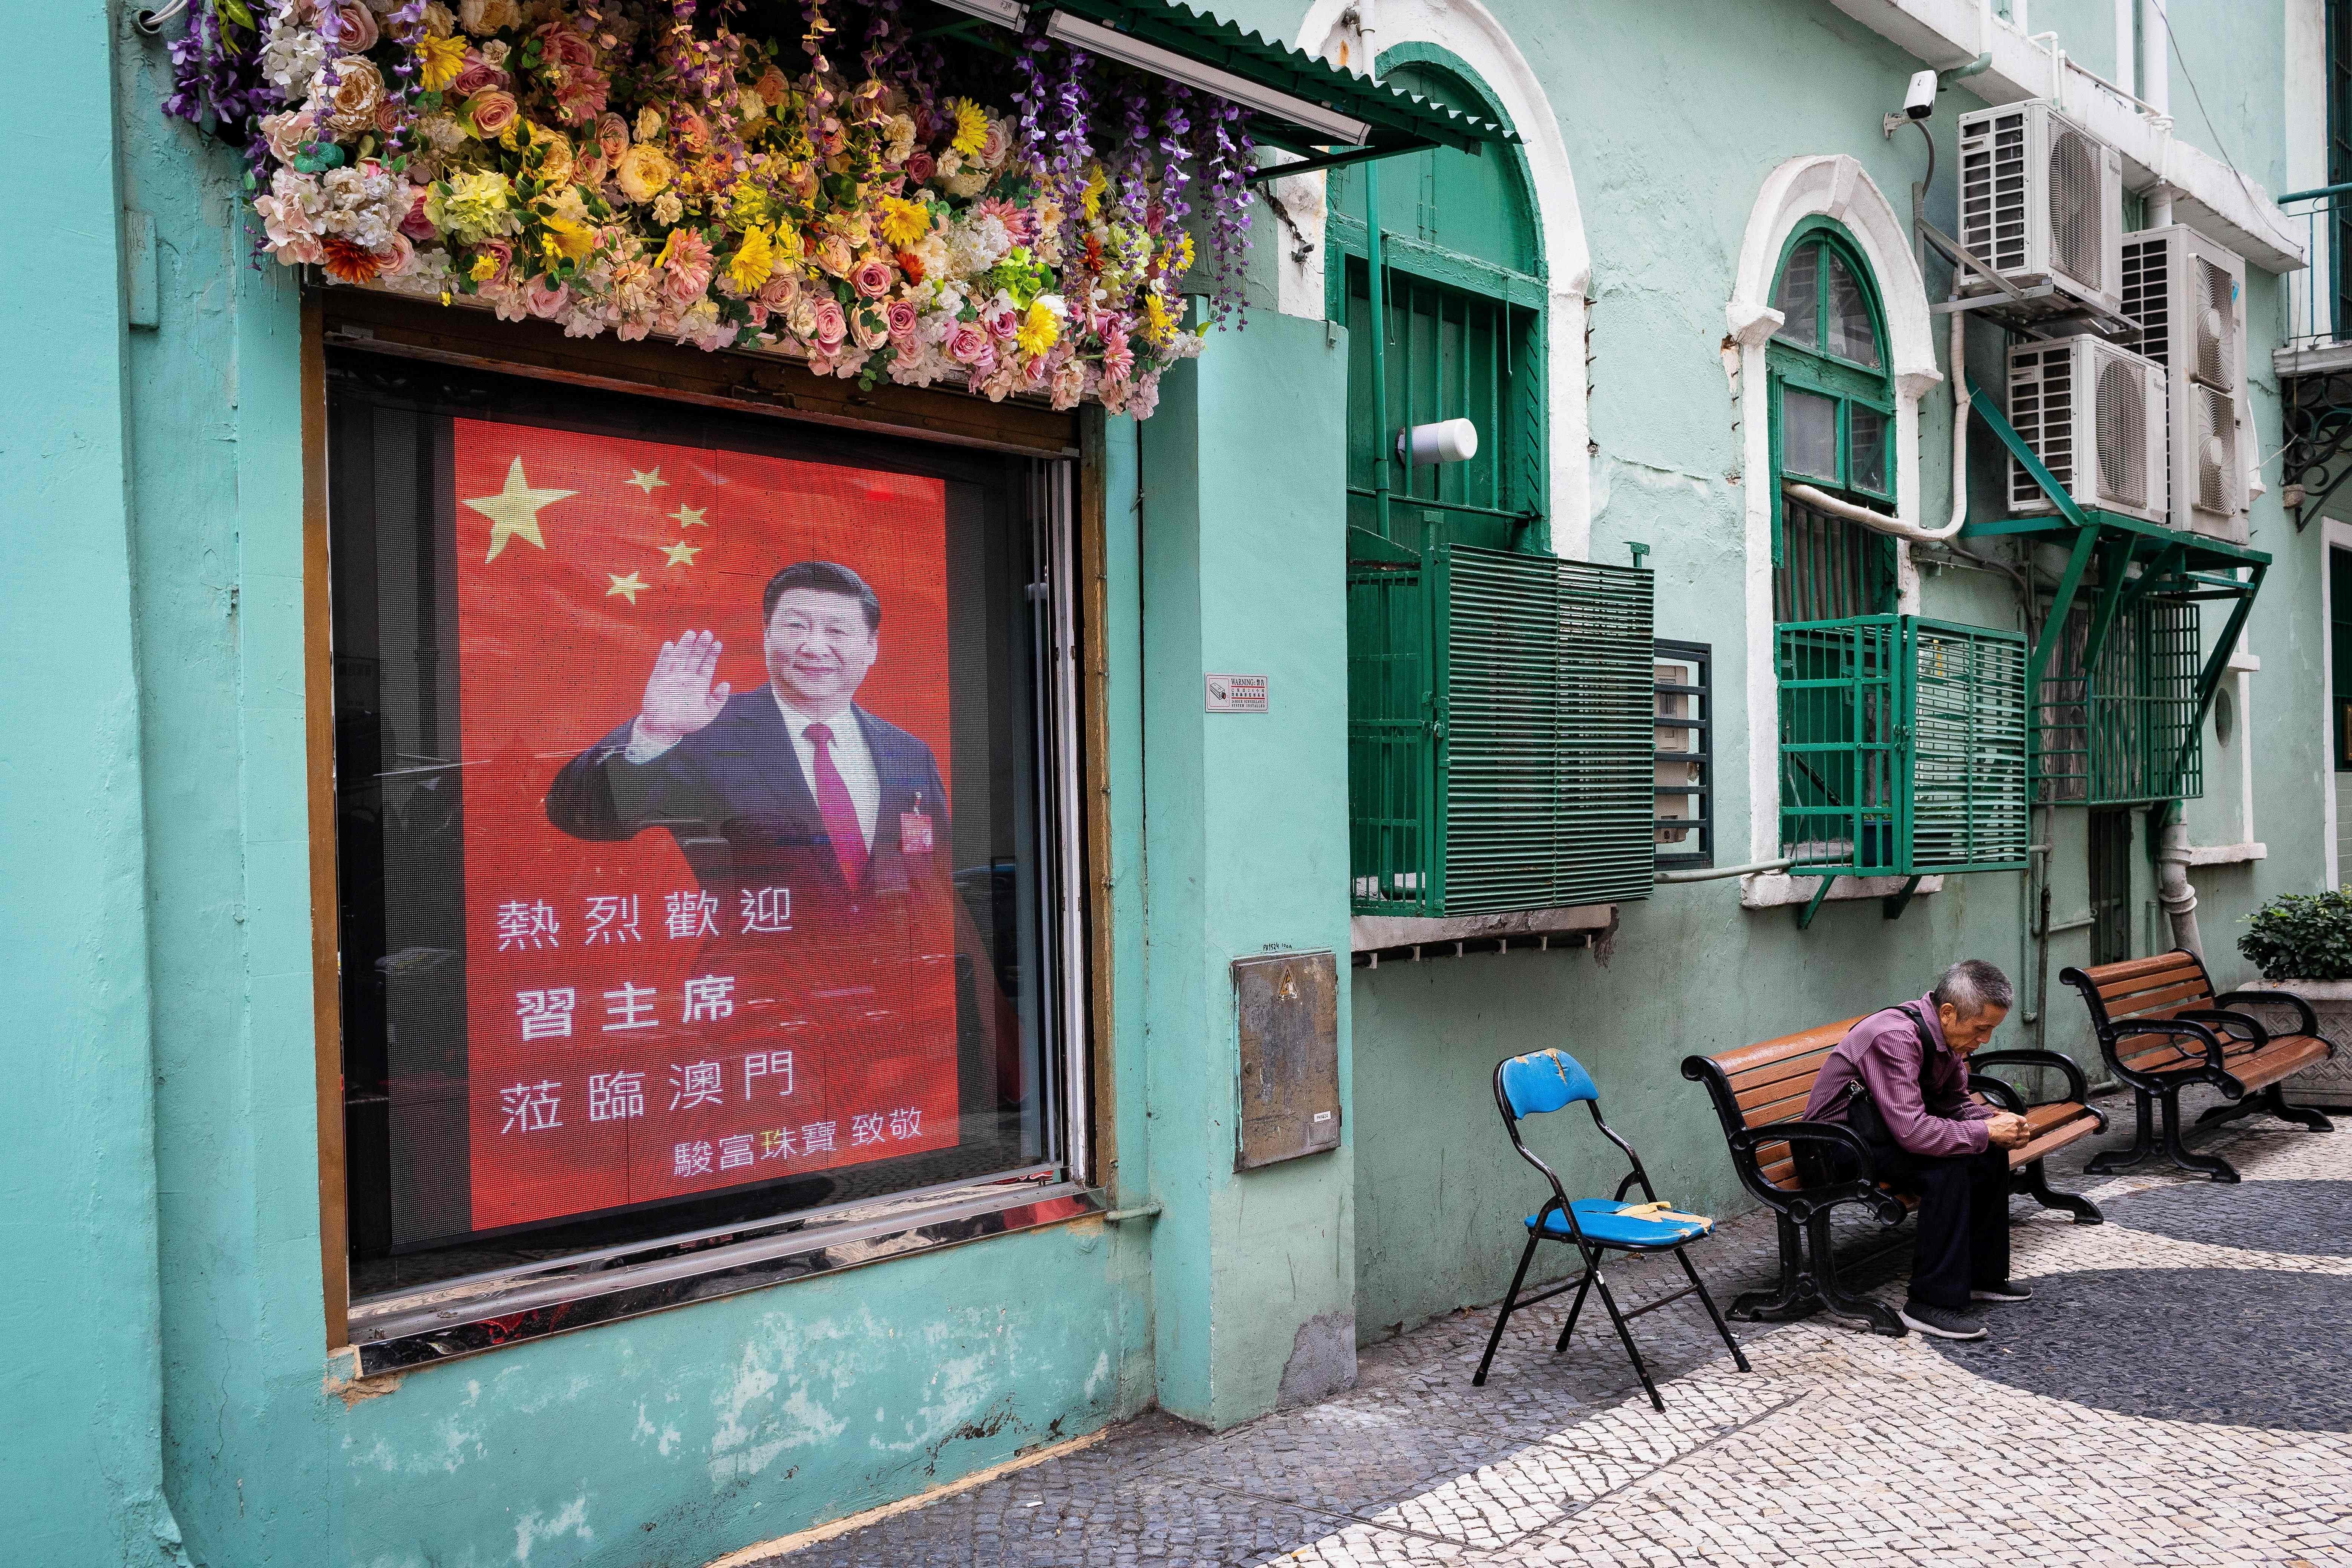 A man sits in an alley next to a screen with the image of China's President Xi Jinping in Macau on December 19, 2019 as the city marks the 20th anniversary of the handover from Portugal to China. Photo: AFP